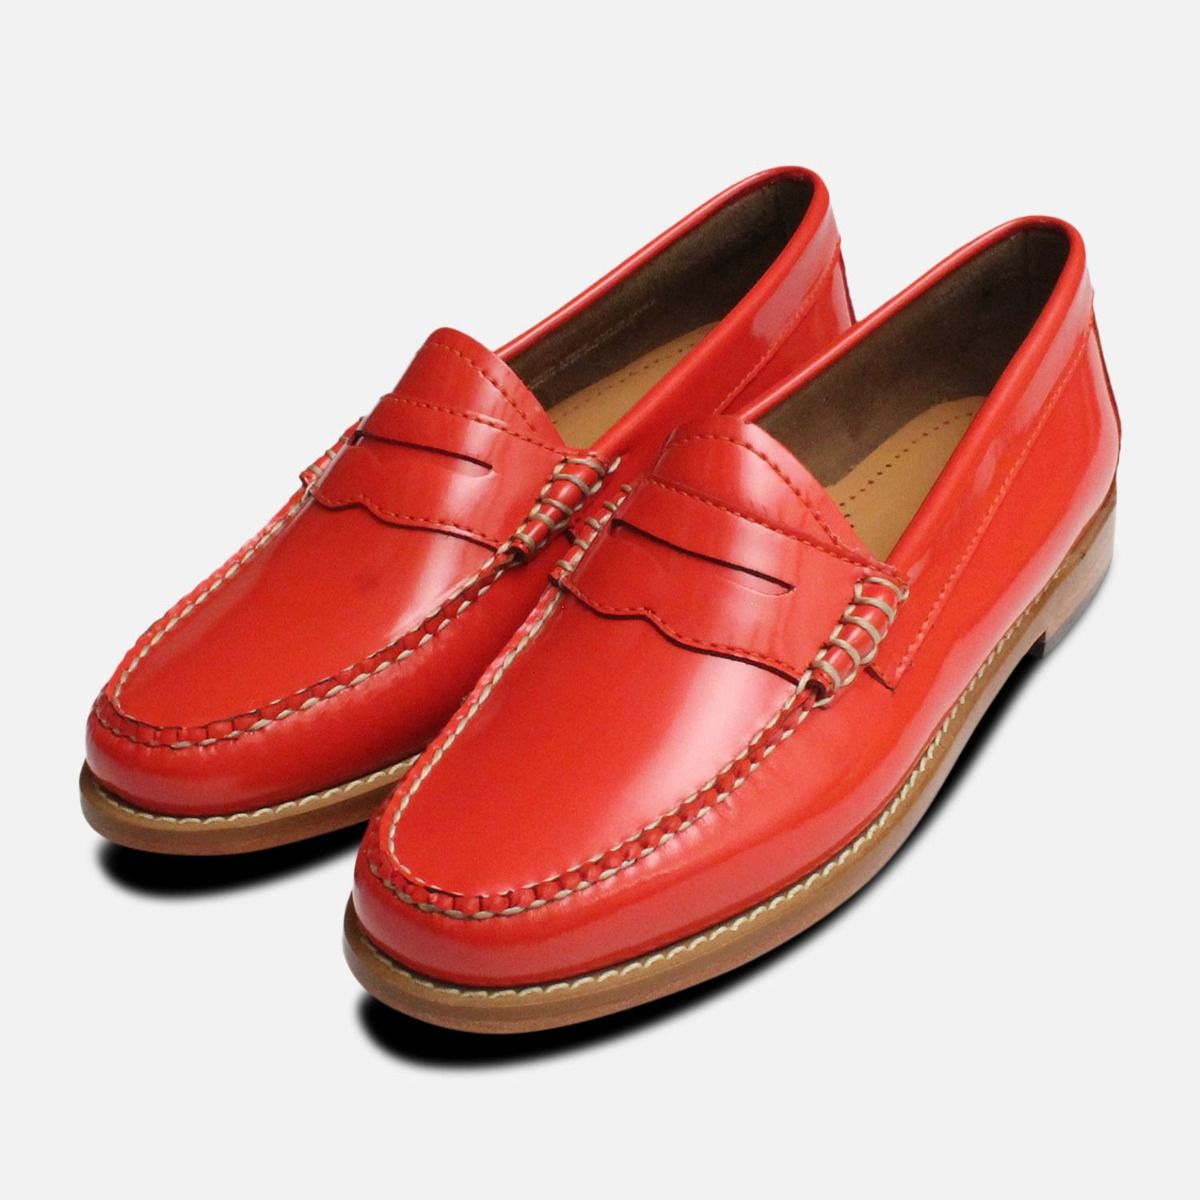 bass weejun penny loafers womens